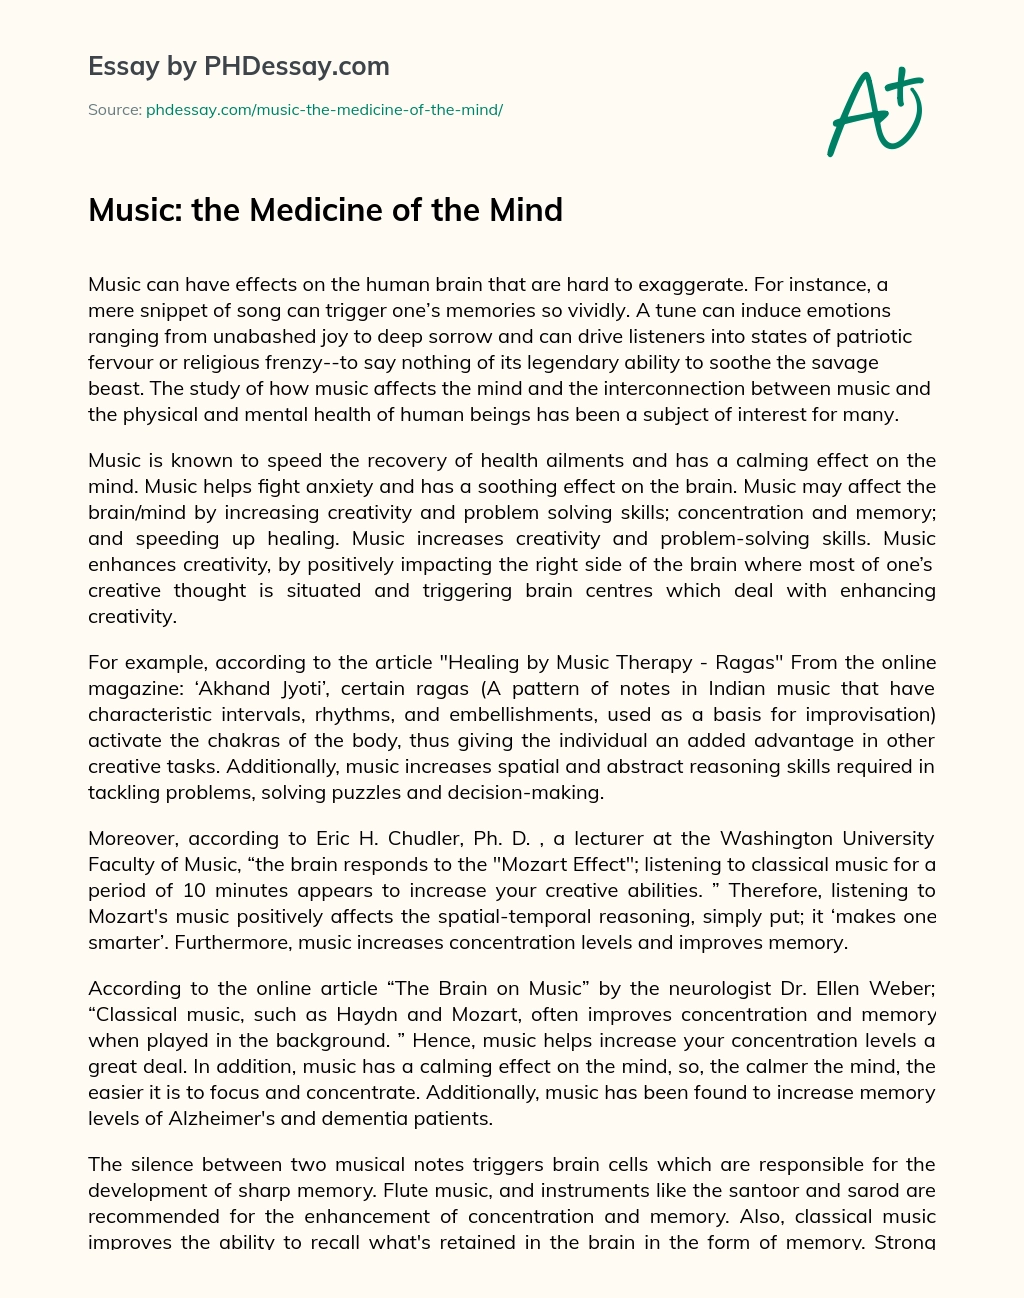 Music: the Medicine of the Mind essay